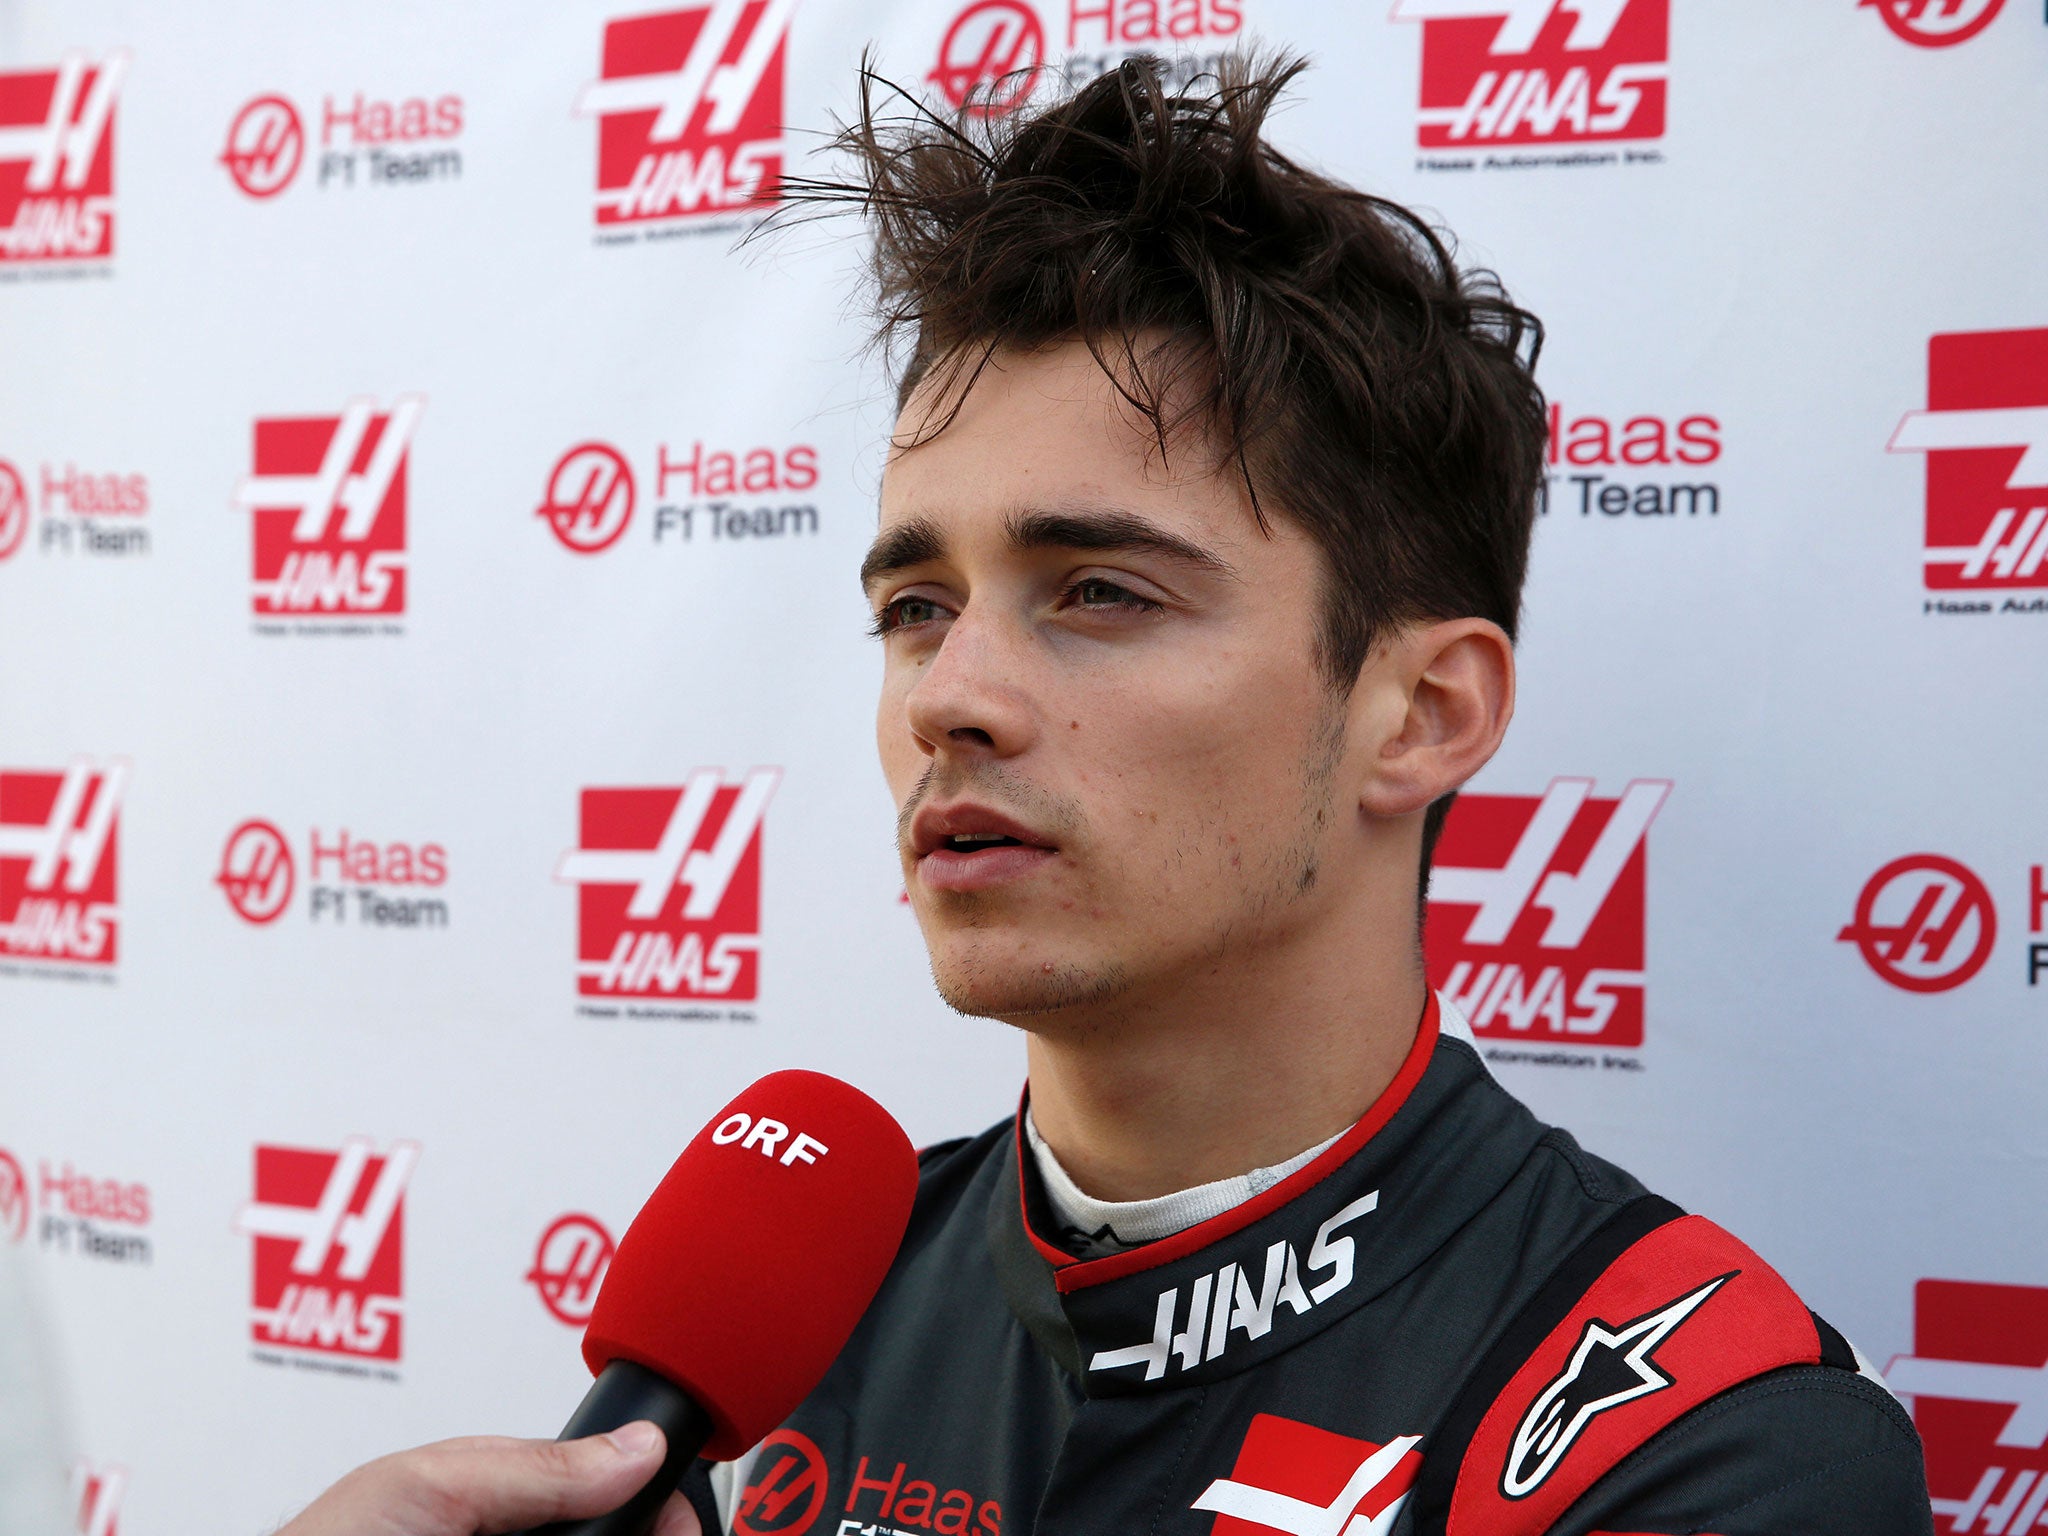 Charles Leclerc looks destined to win F2 this season but could find an F1 drive hard to come by